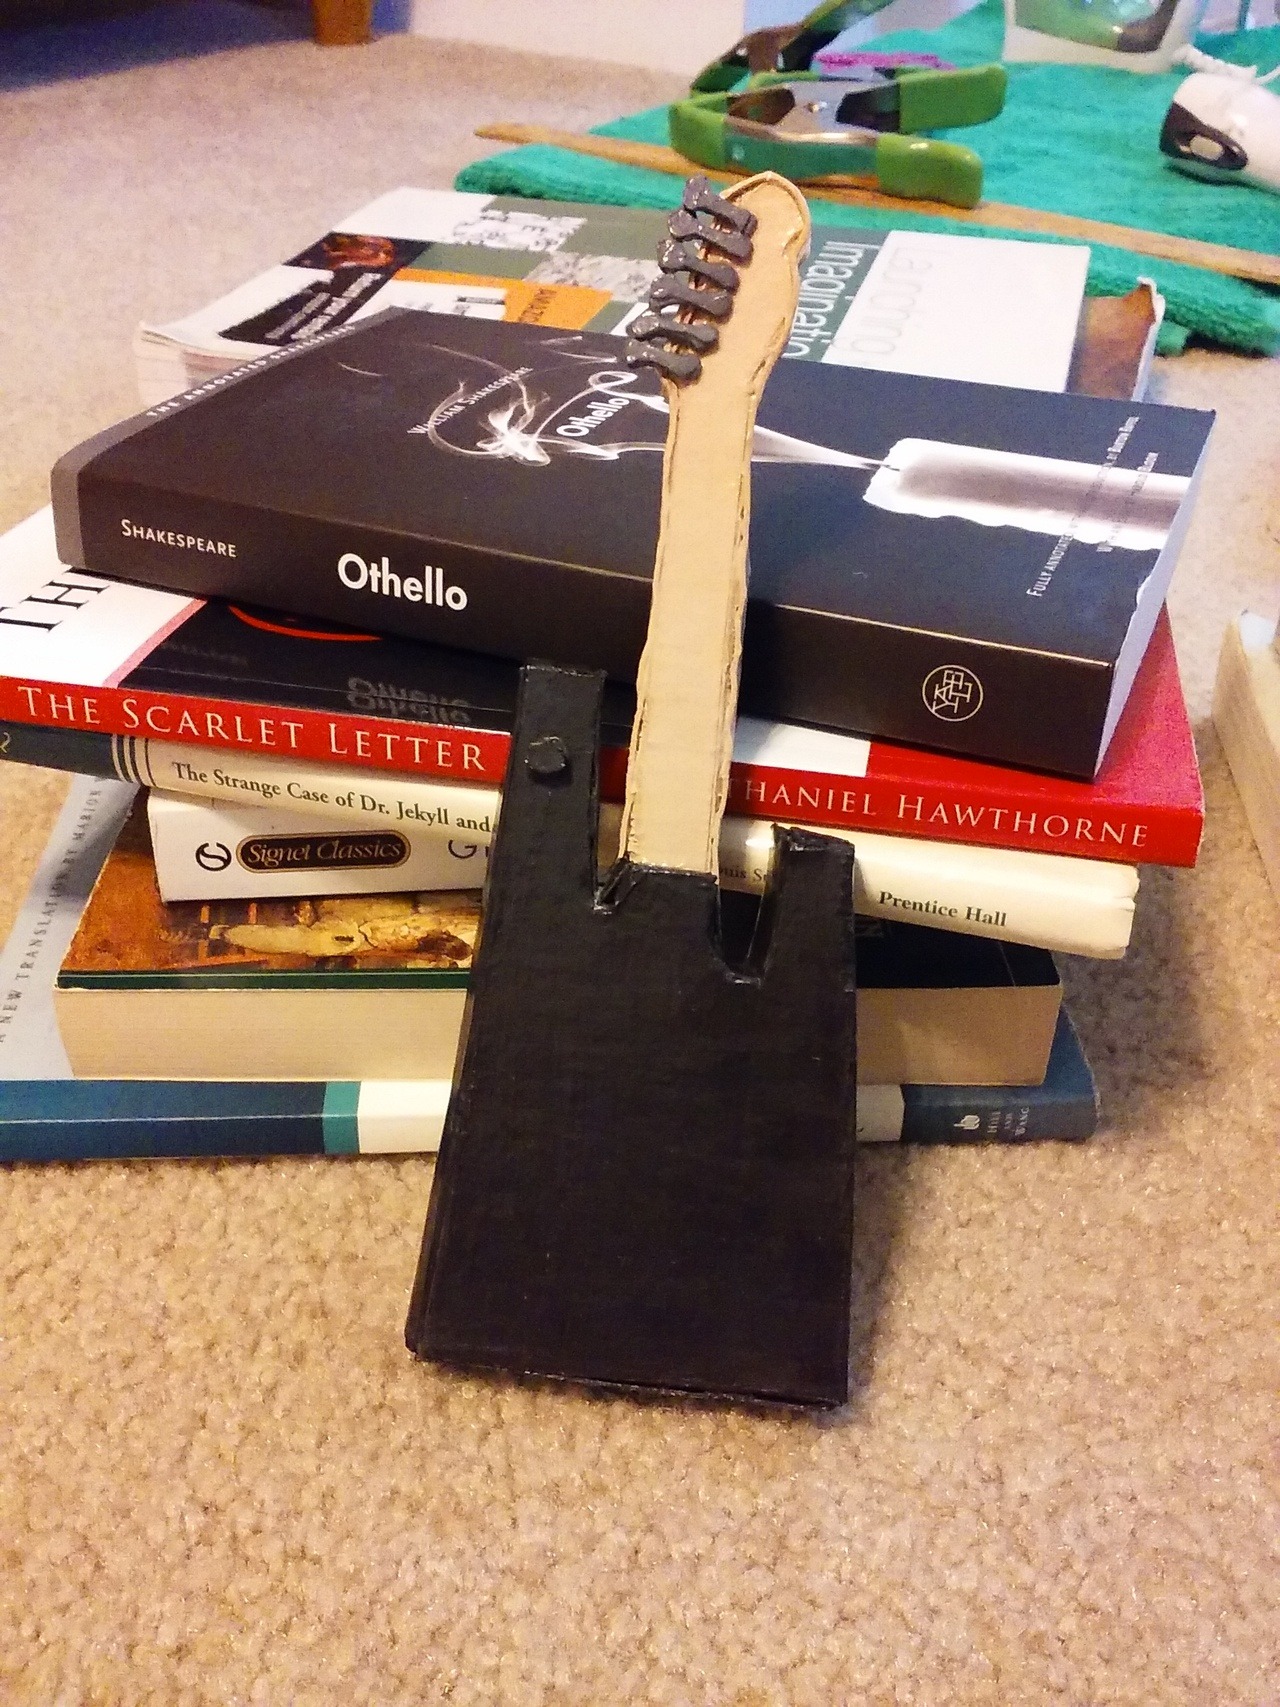 The back of the guitar leaning on a stack of books. The body is black and the neck is lighter brown.